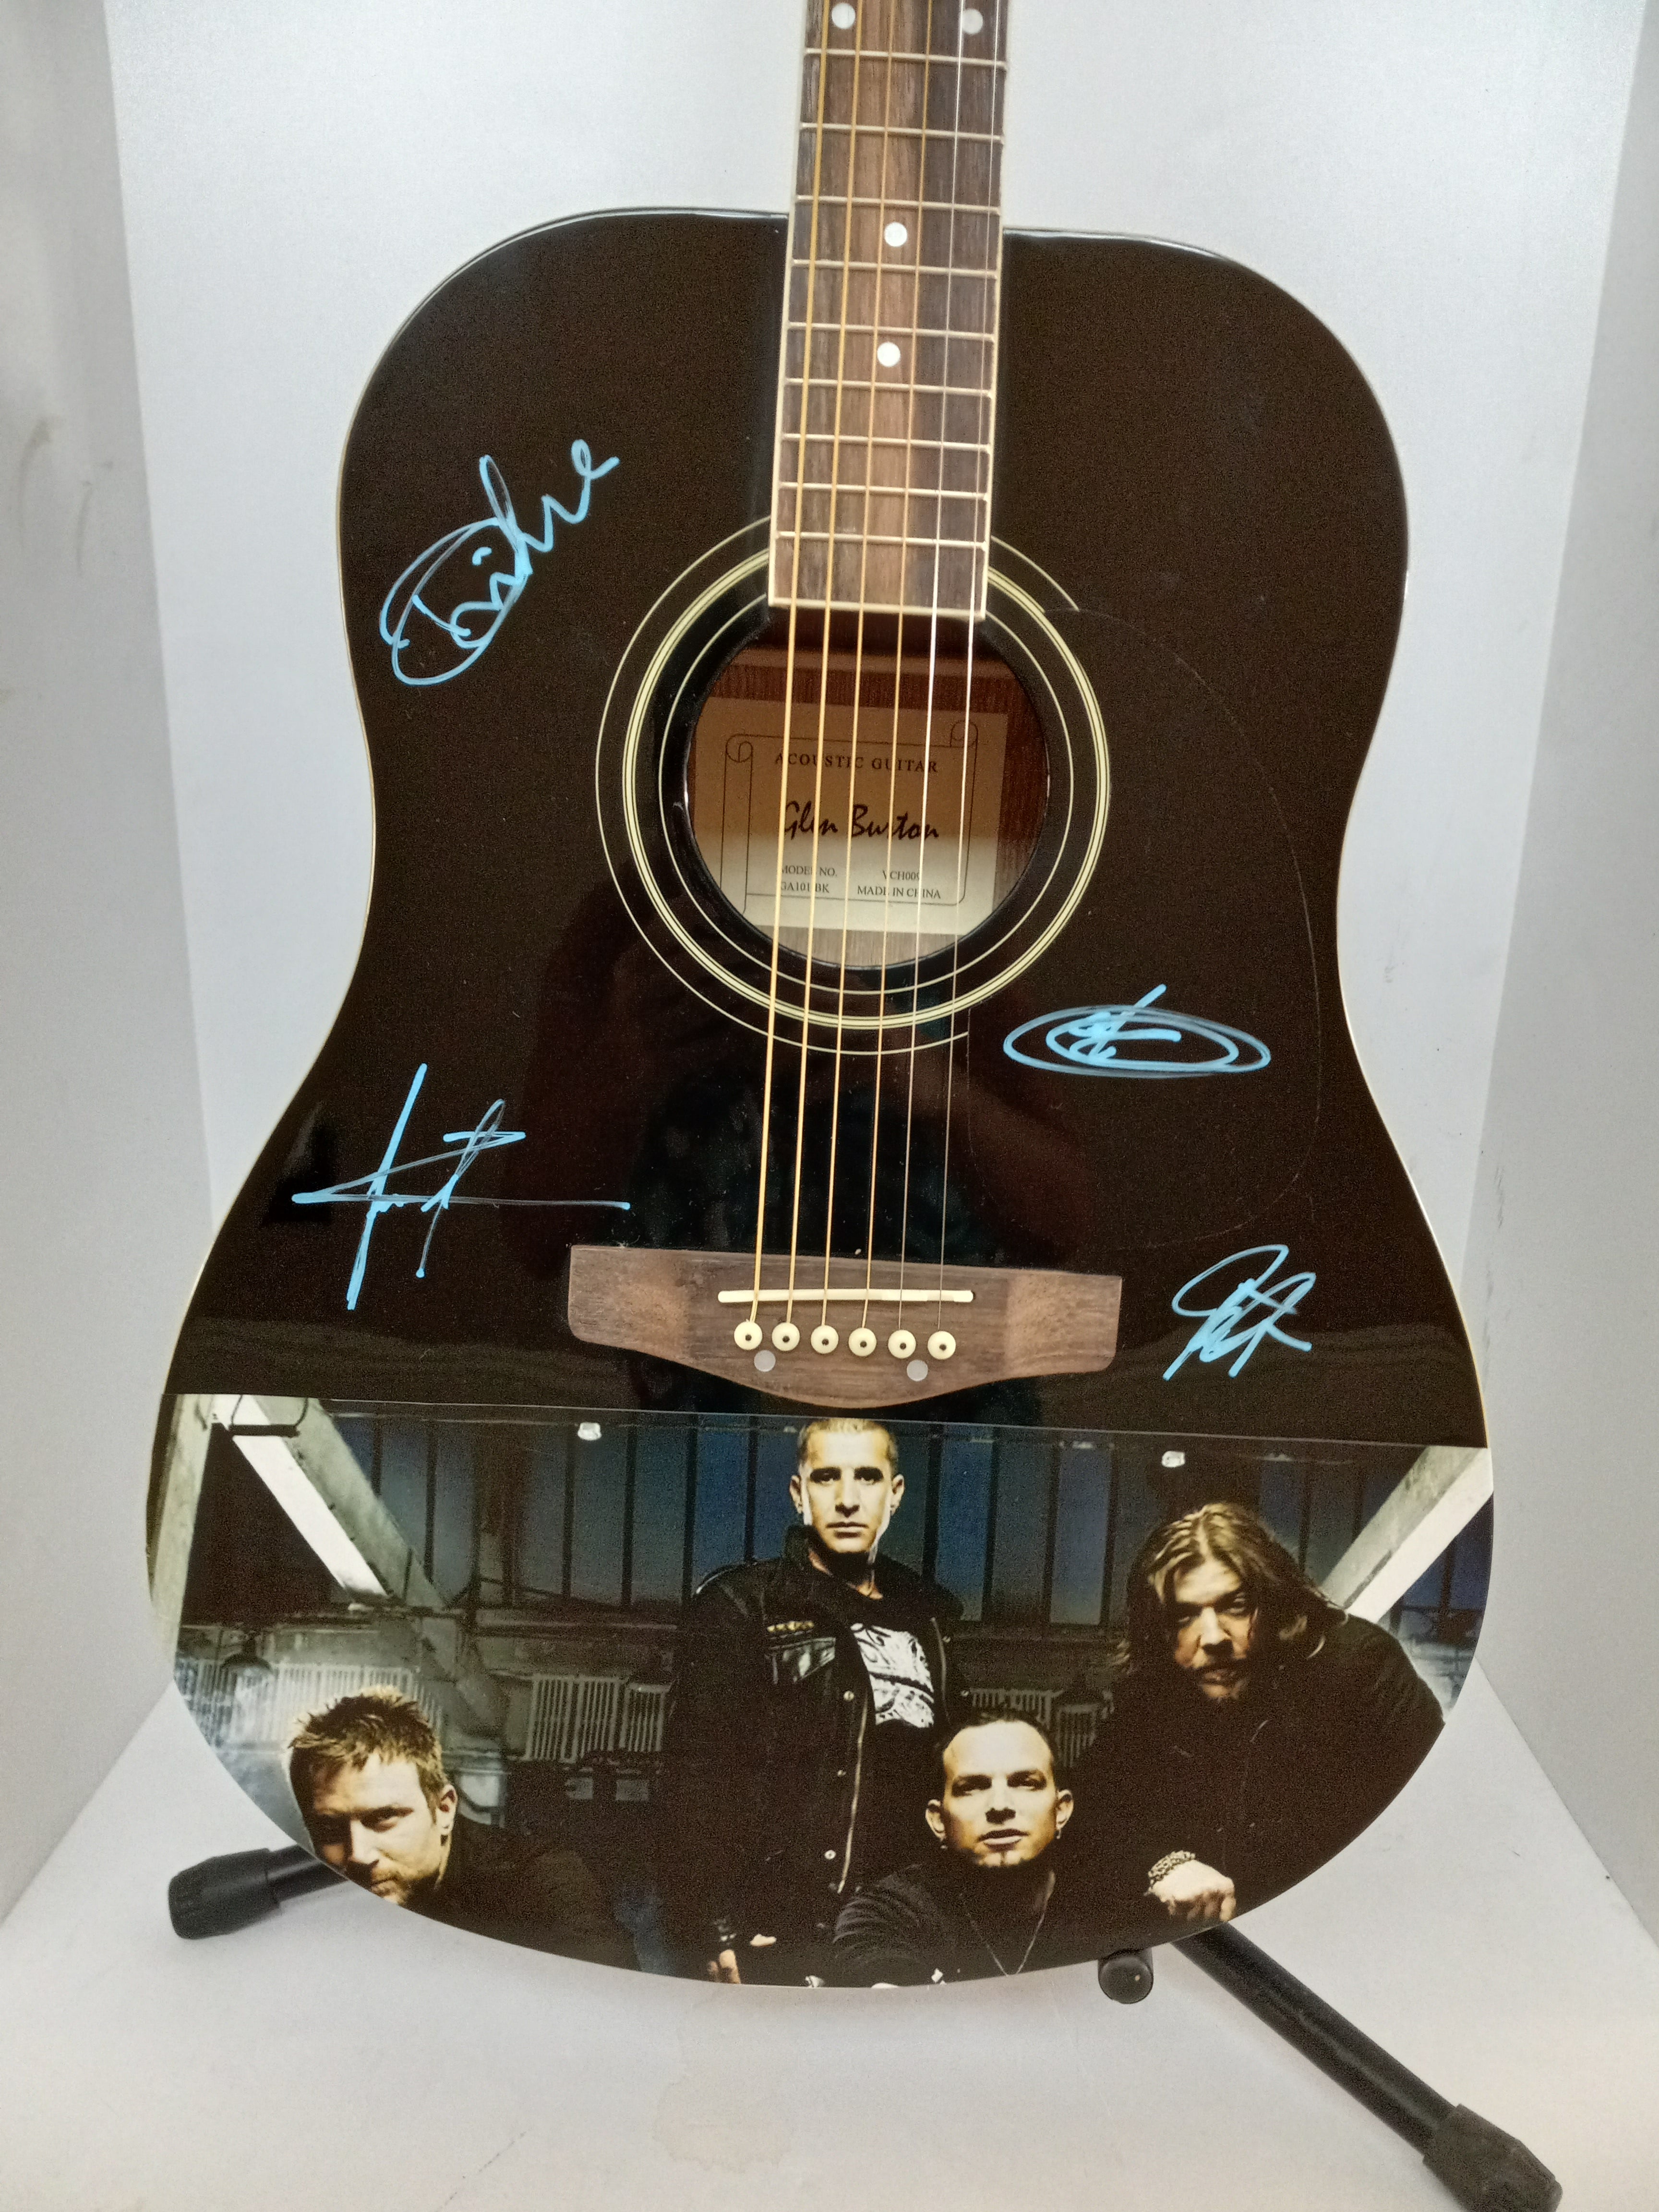 Scott Stapp, Mark Tremonti, Scott Phillips, Creed signed one of a kind guitar with proof